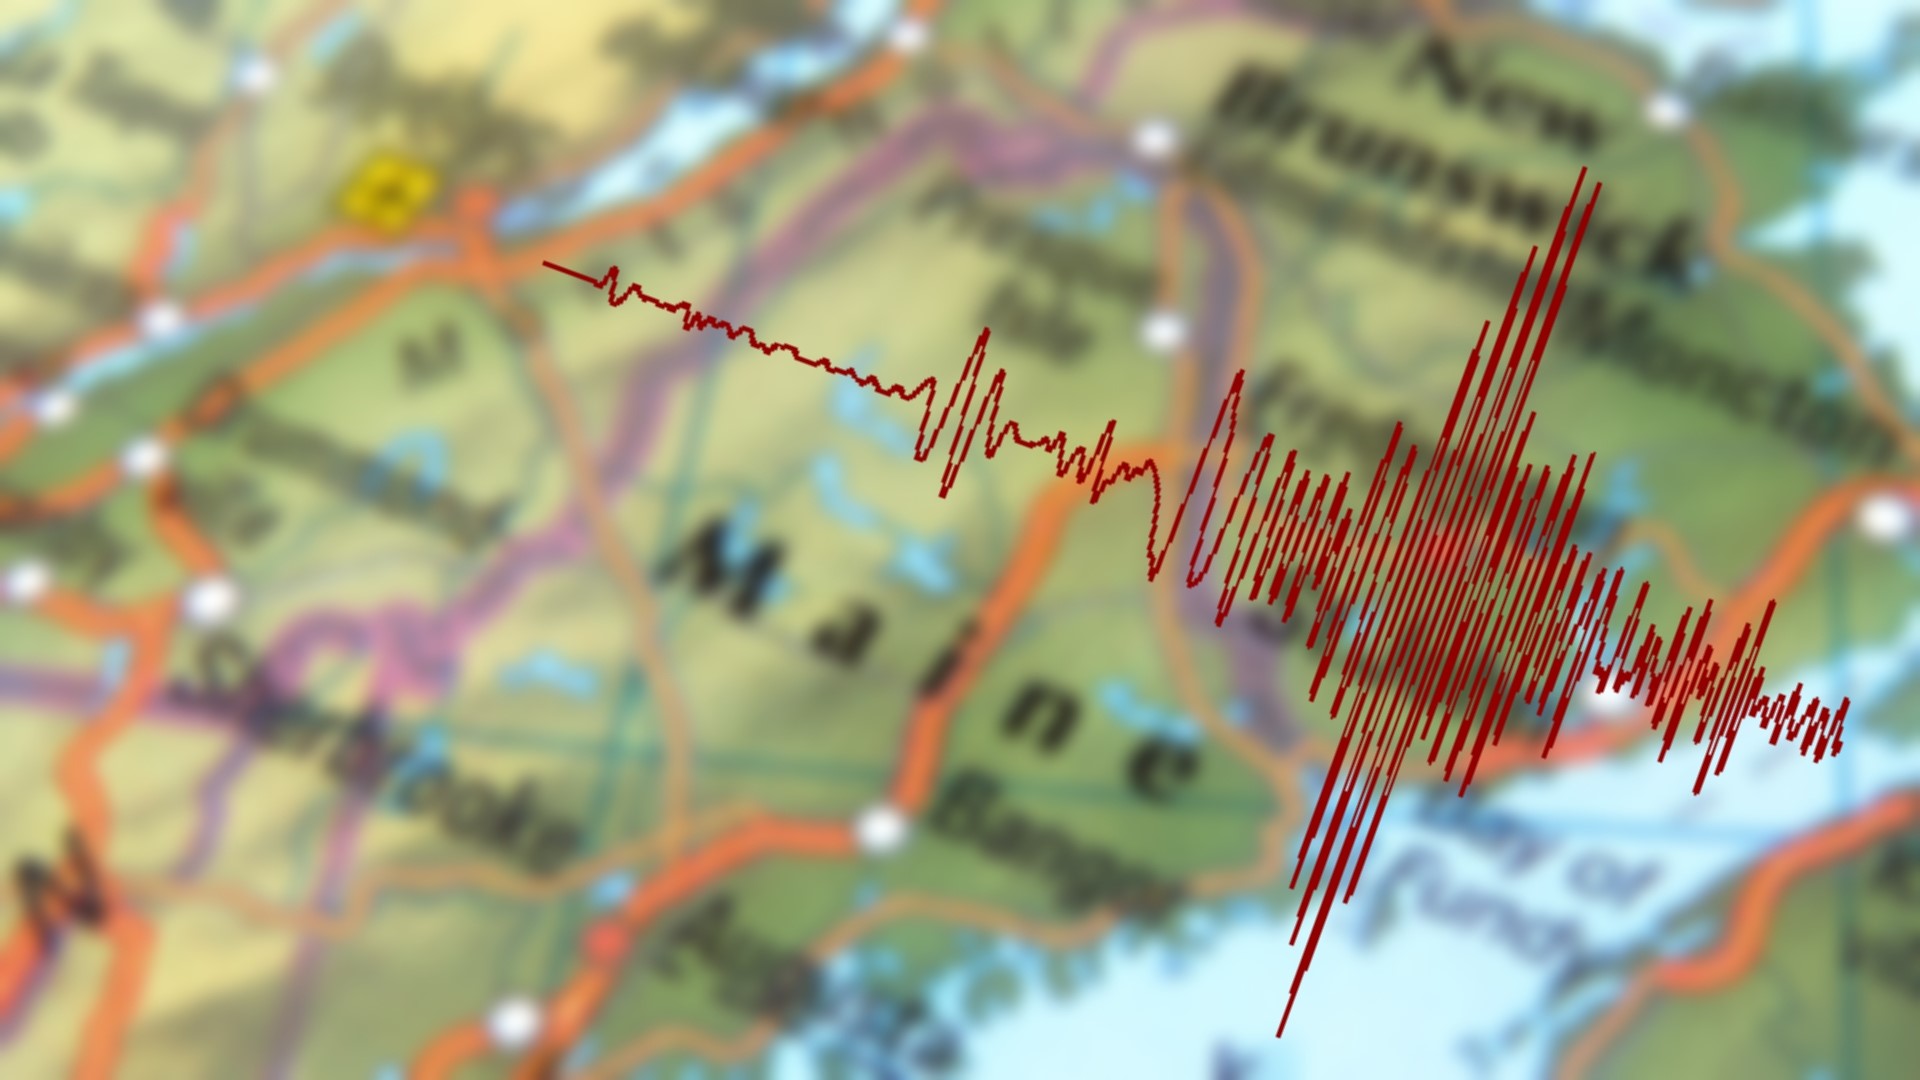 According to U.S. Geological Survey, the quake happened around 1:27 a.m., near the Phillips River.